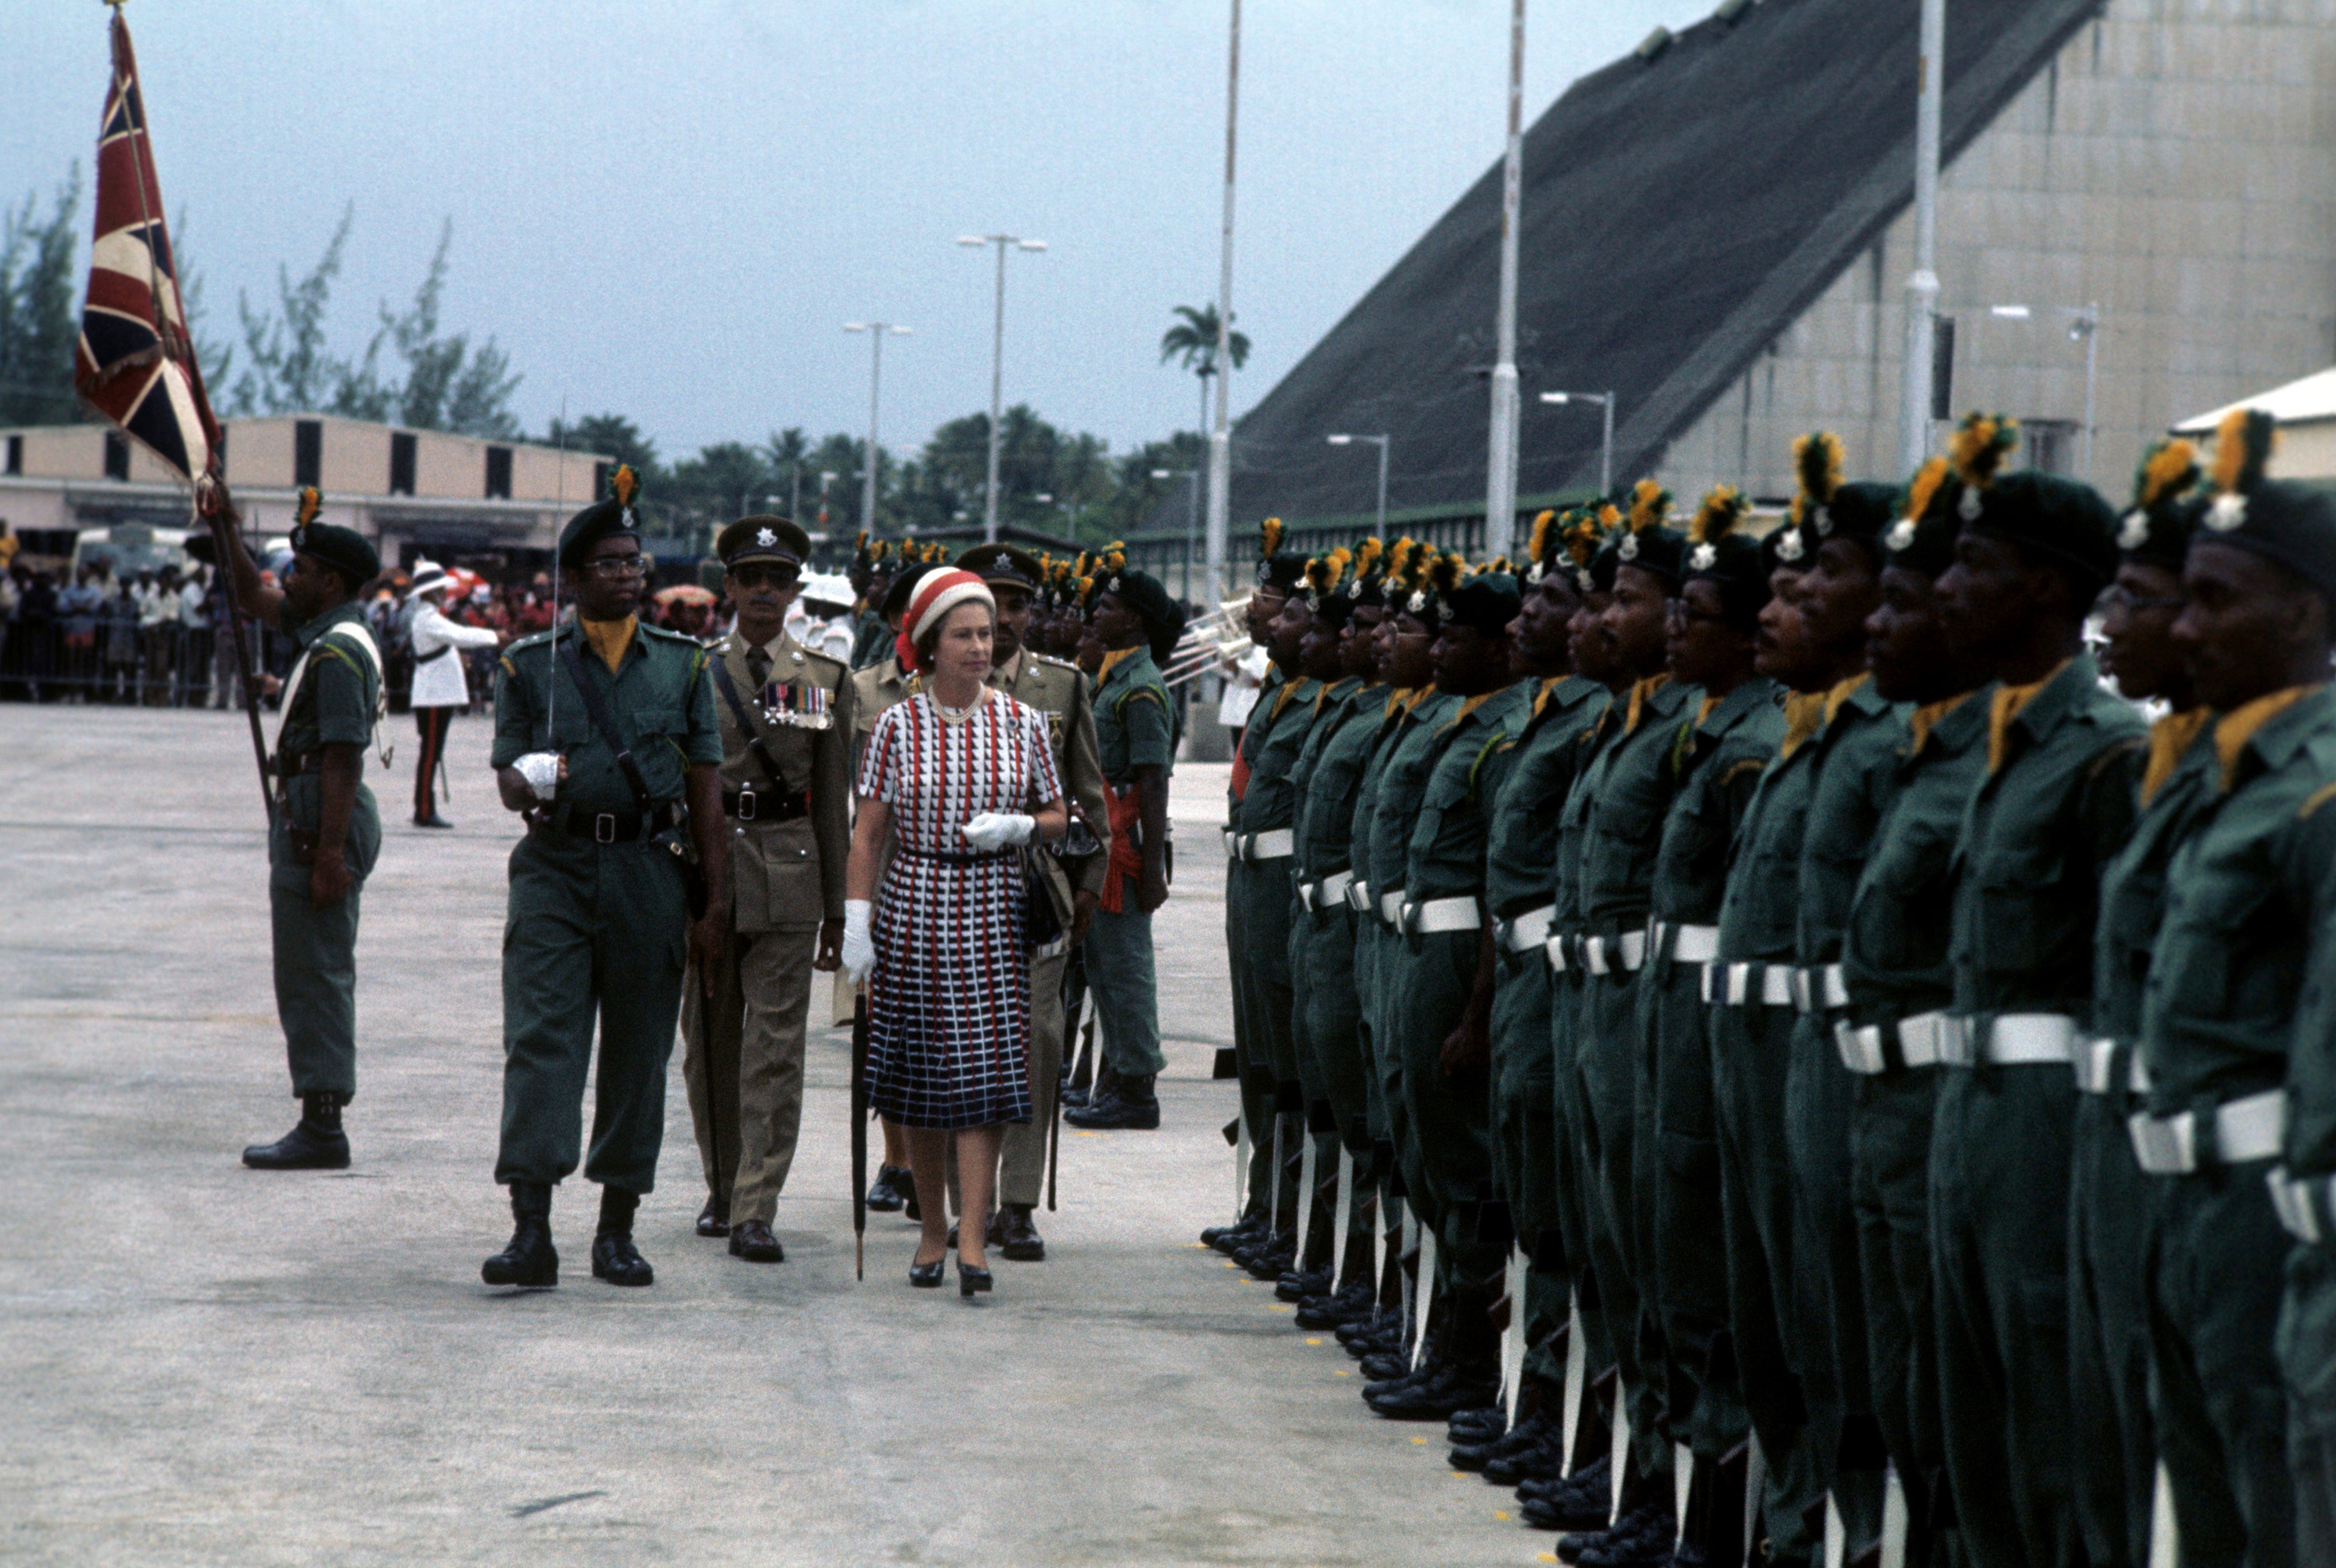 Queen Elizabeth II inspecting a guard of honour mounted by the Barbados Regiment on her arrival in Bridgetown in 1977